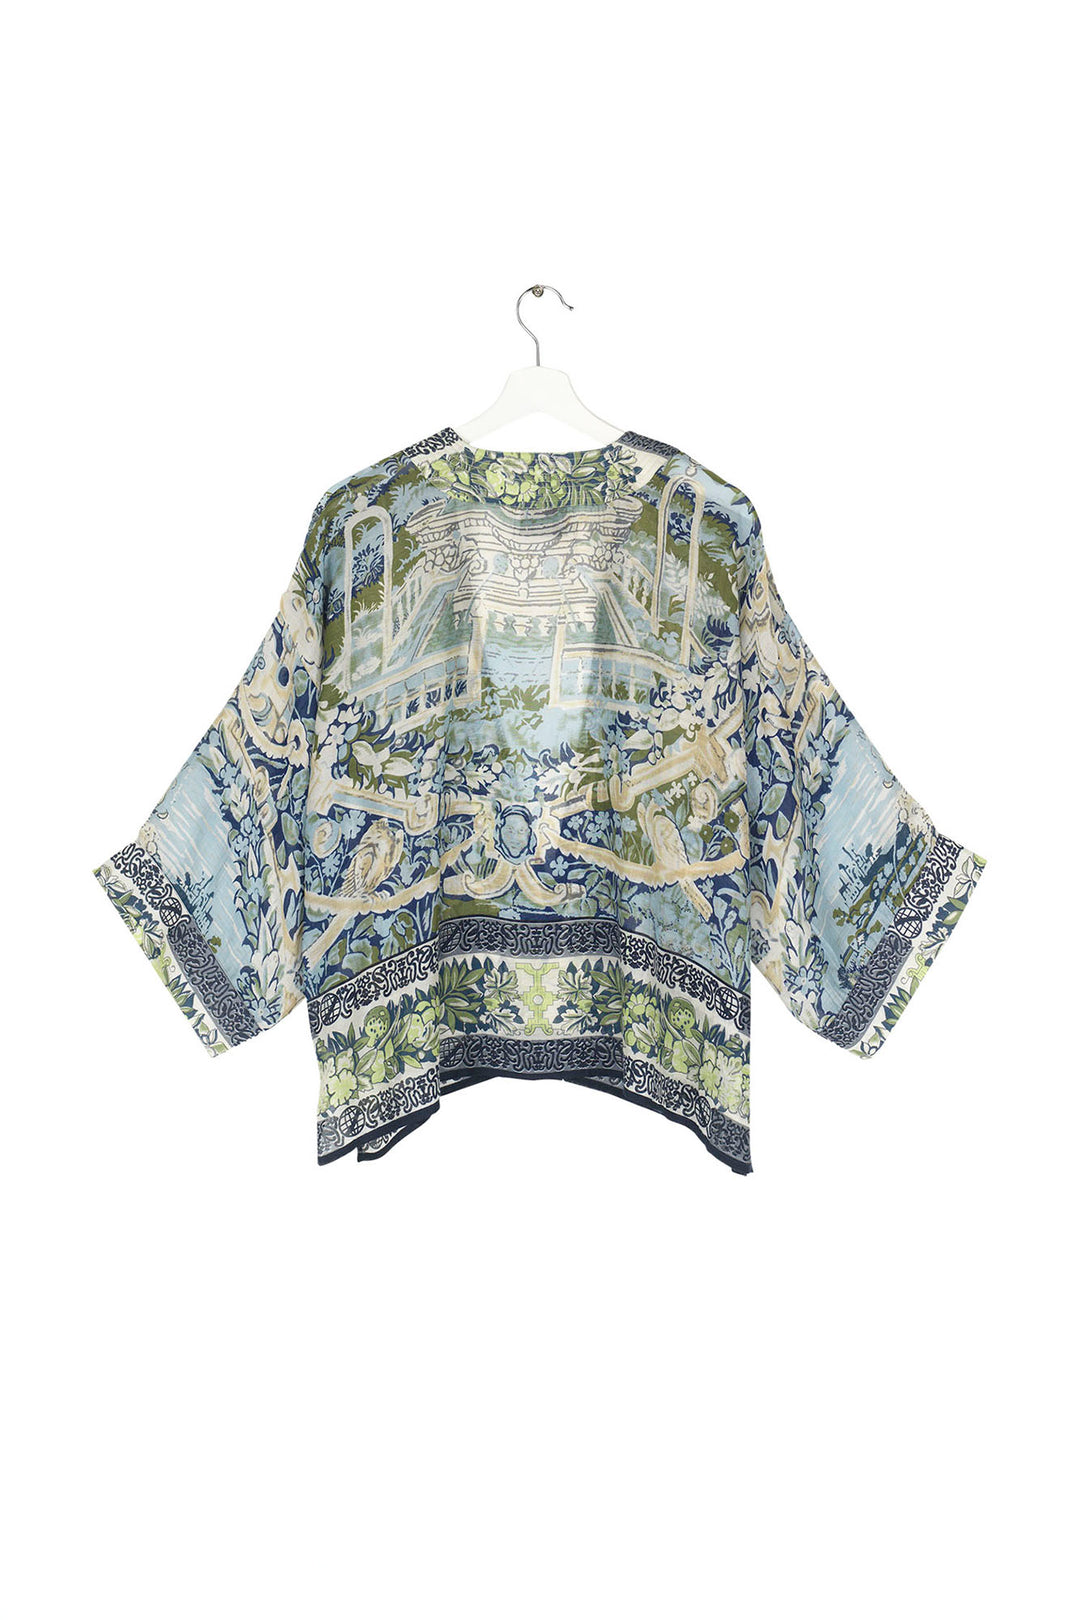 ladies short kimono jacket beautiful garden scenes in sea greens and blues by One Hundred Stars